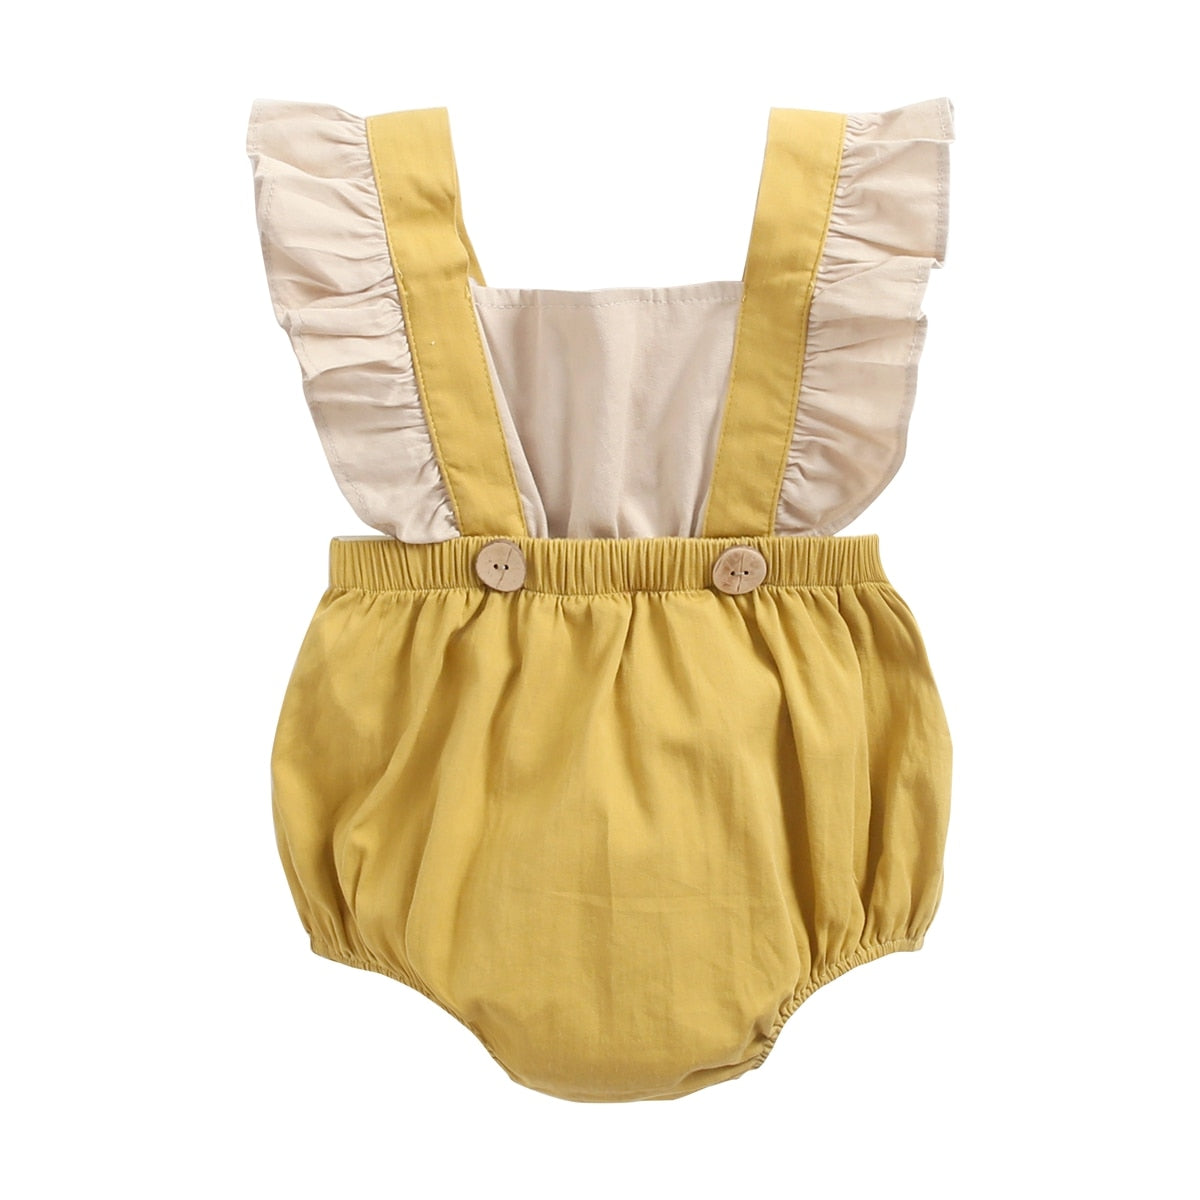 Fly Sleeve Romper 0-3yrs Jumpsuit - Coco Potato - dresses and partywear for little girls